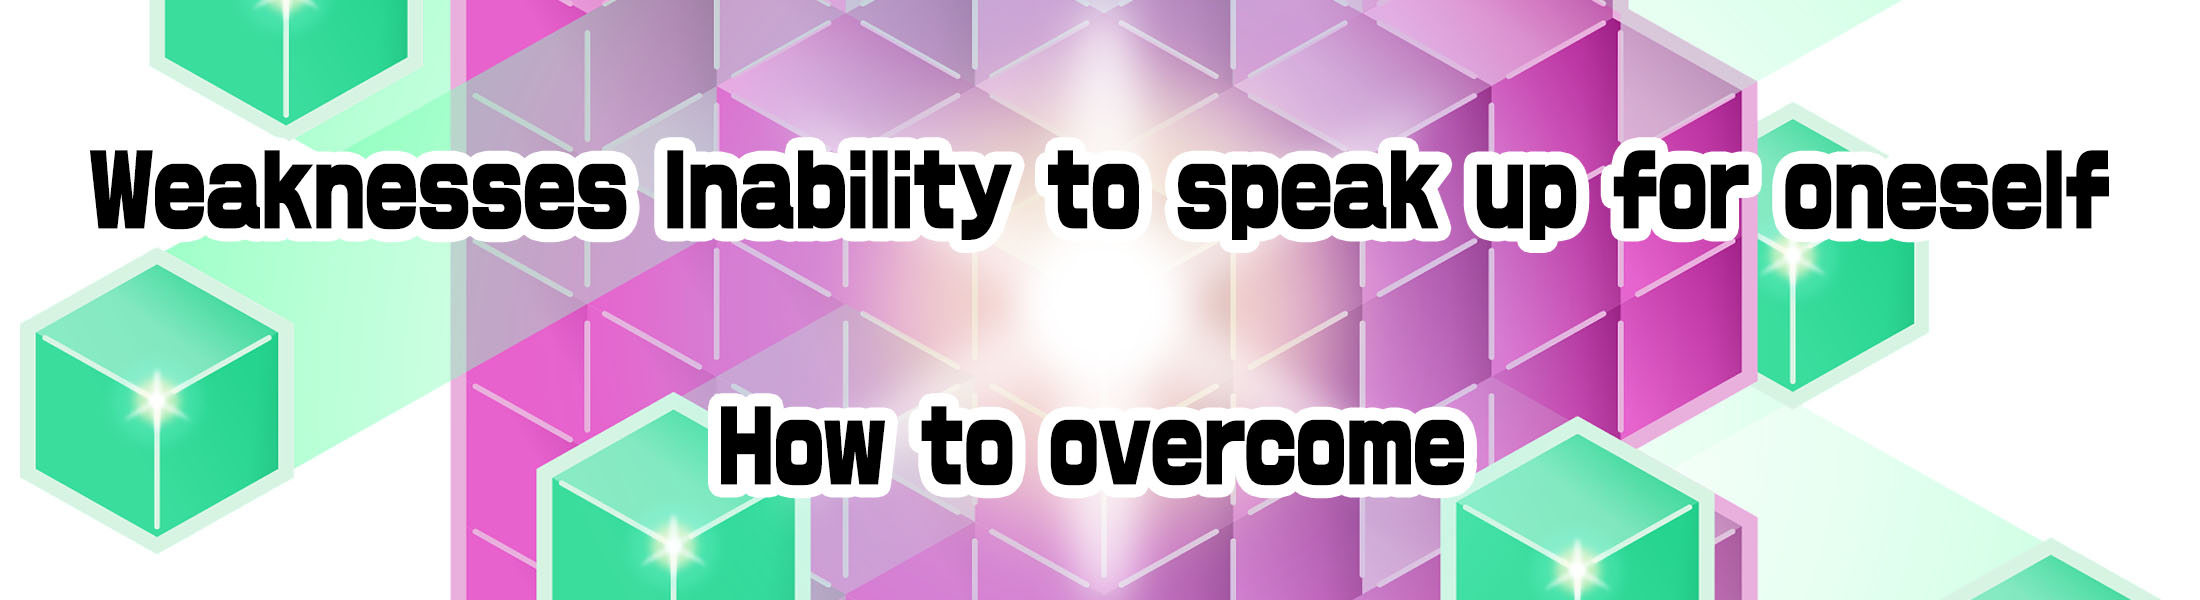 Weaknesses Inability to speak up for oneself How to overcome